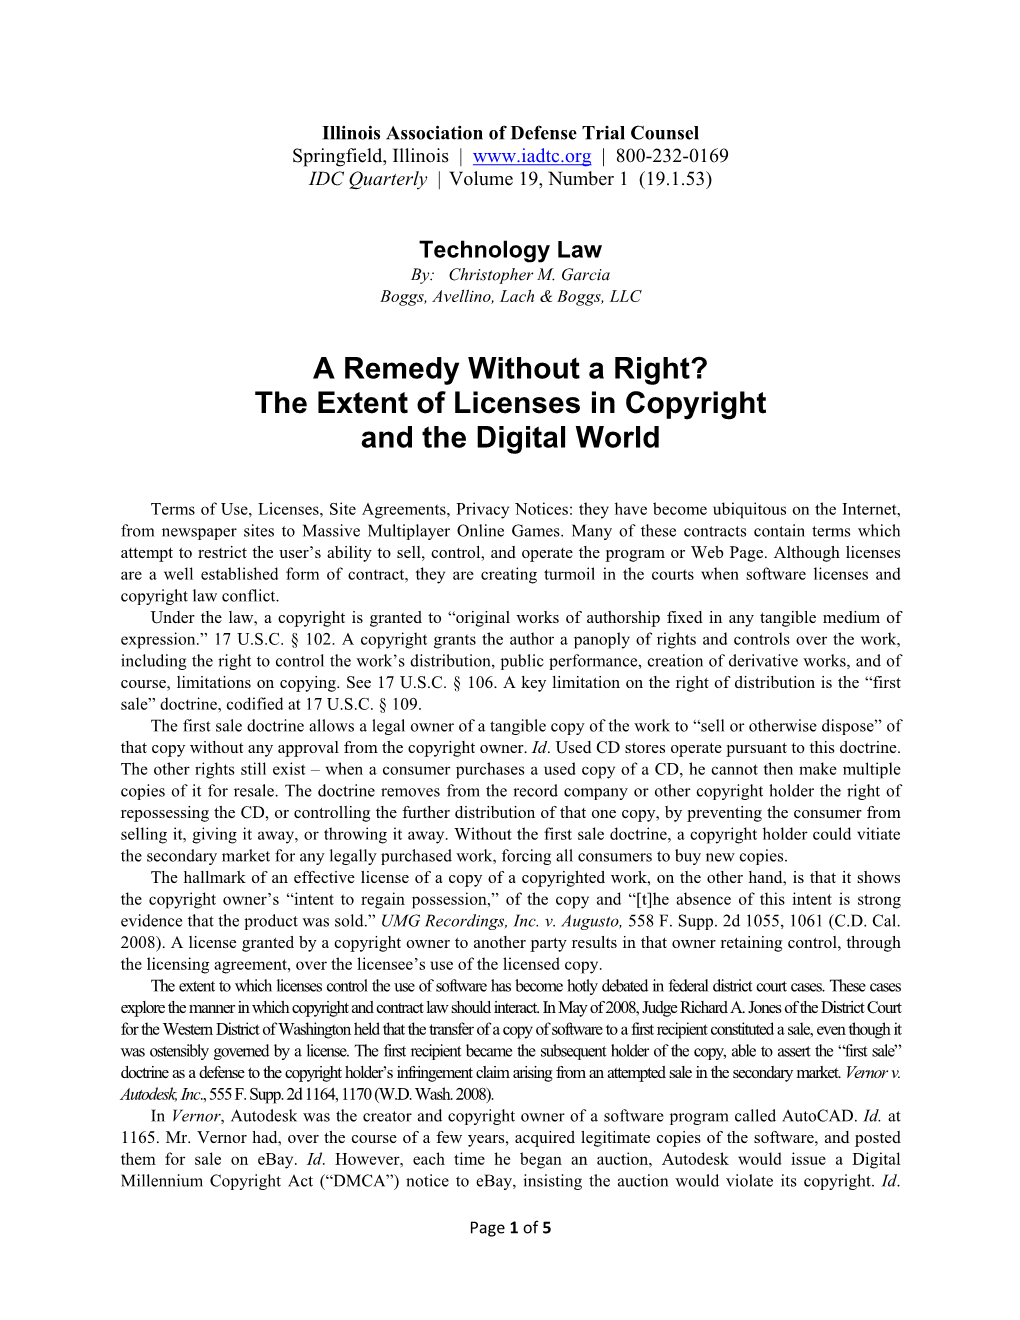 A Remedy Without a Right? the Extent of Licenses in Copyright and the Digital World